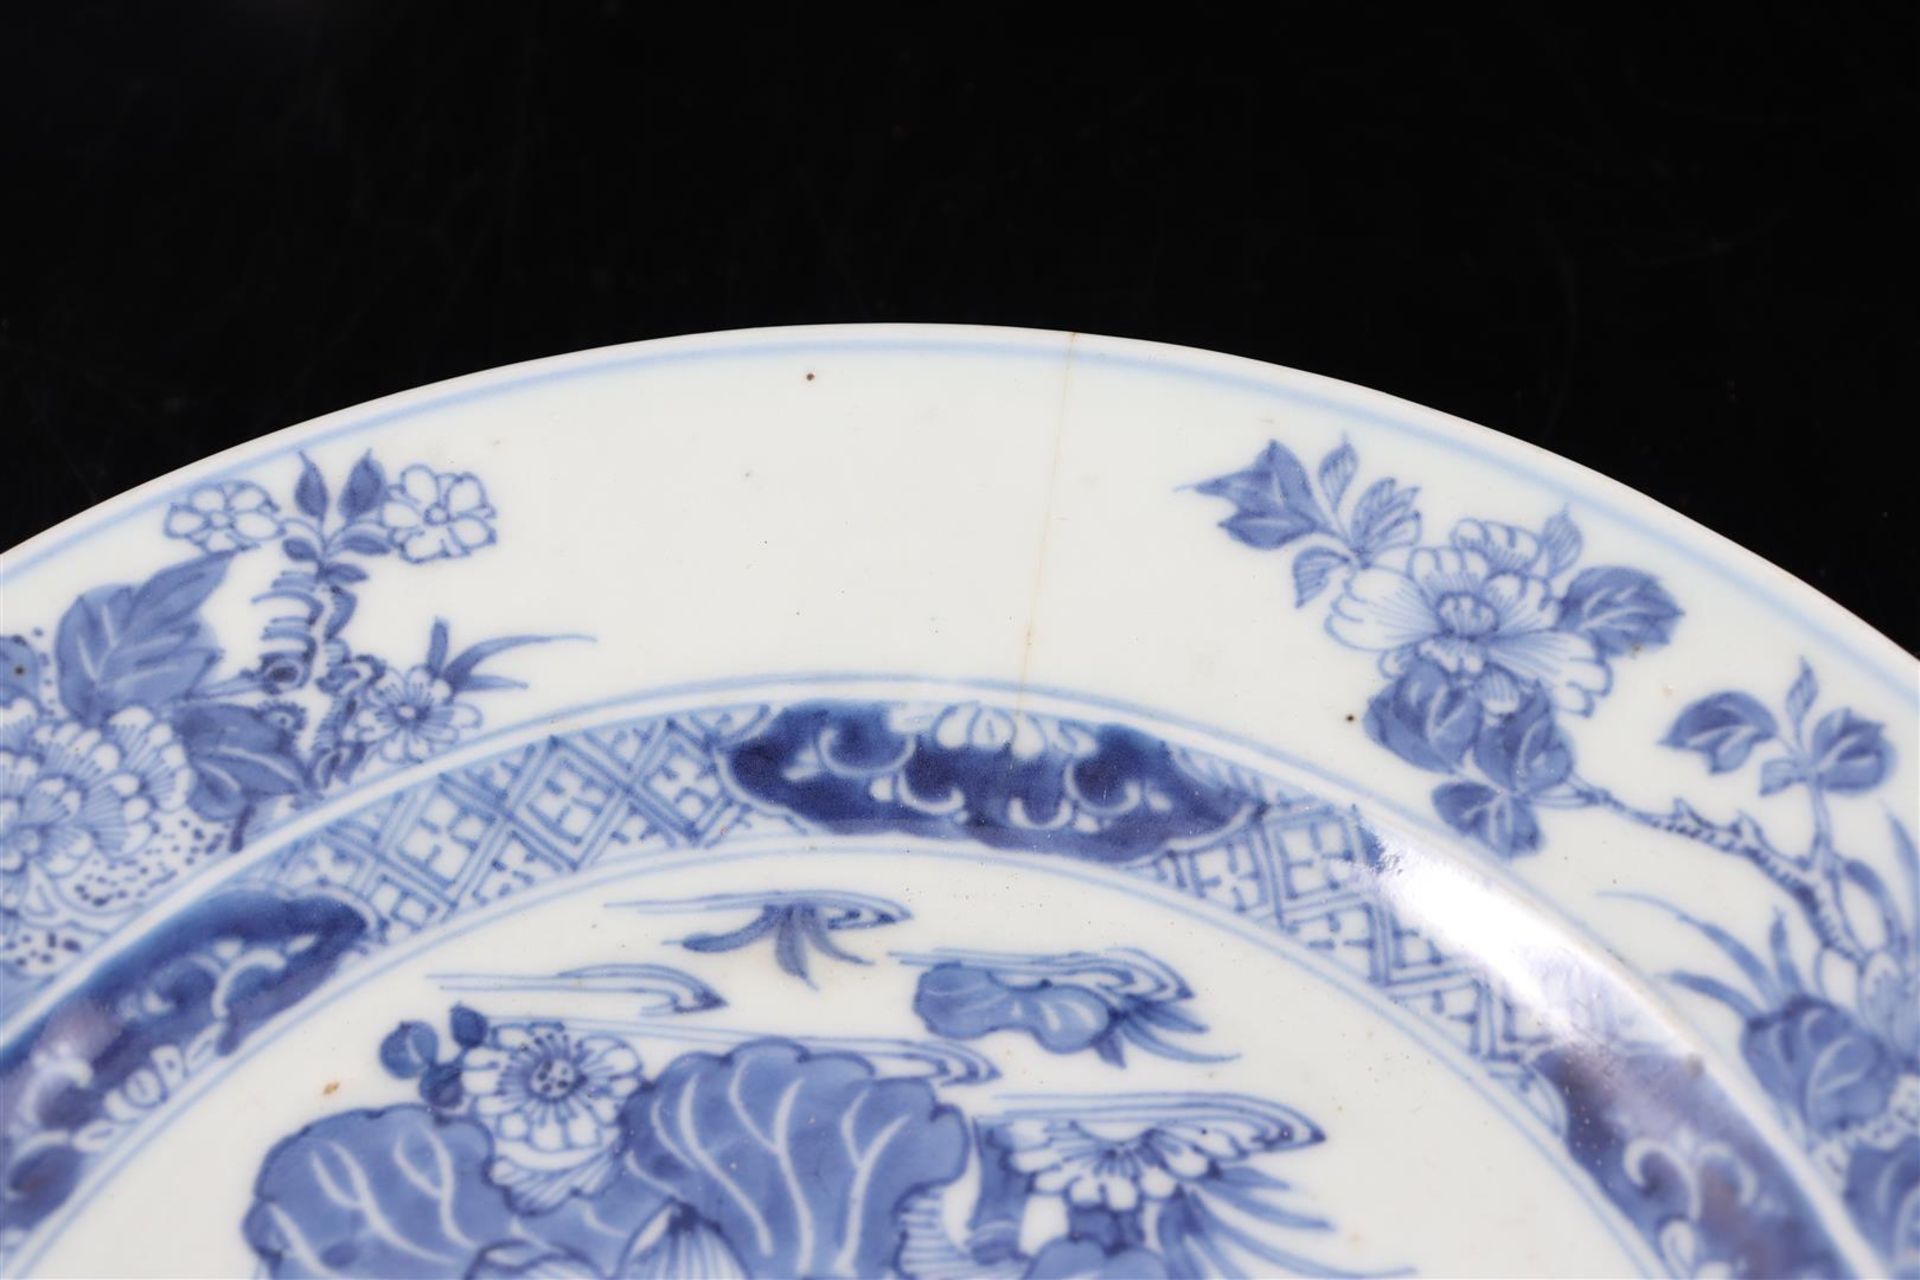 6 Chinese 19th century plates with blue floral decoration - Image 2 of 2